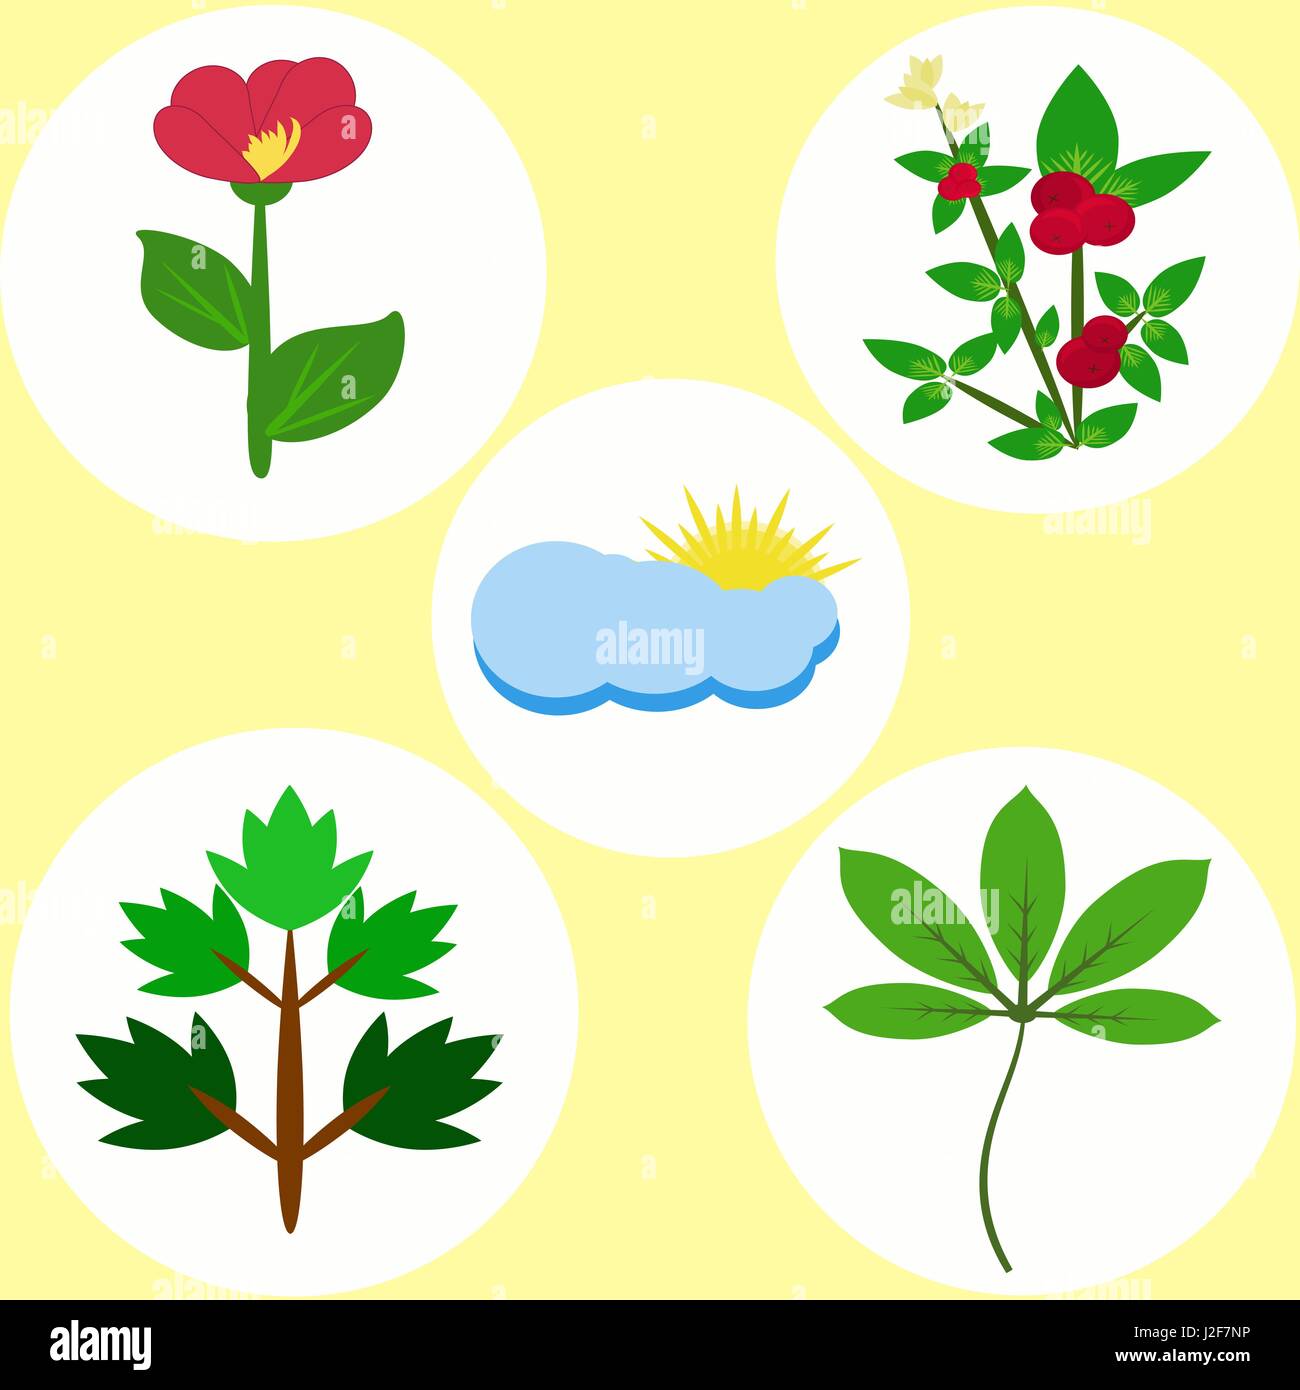 Set of colored flat natural elements from flowers, bush, foliage, clouds Stock Vector